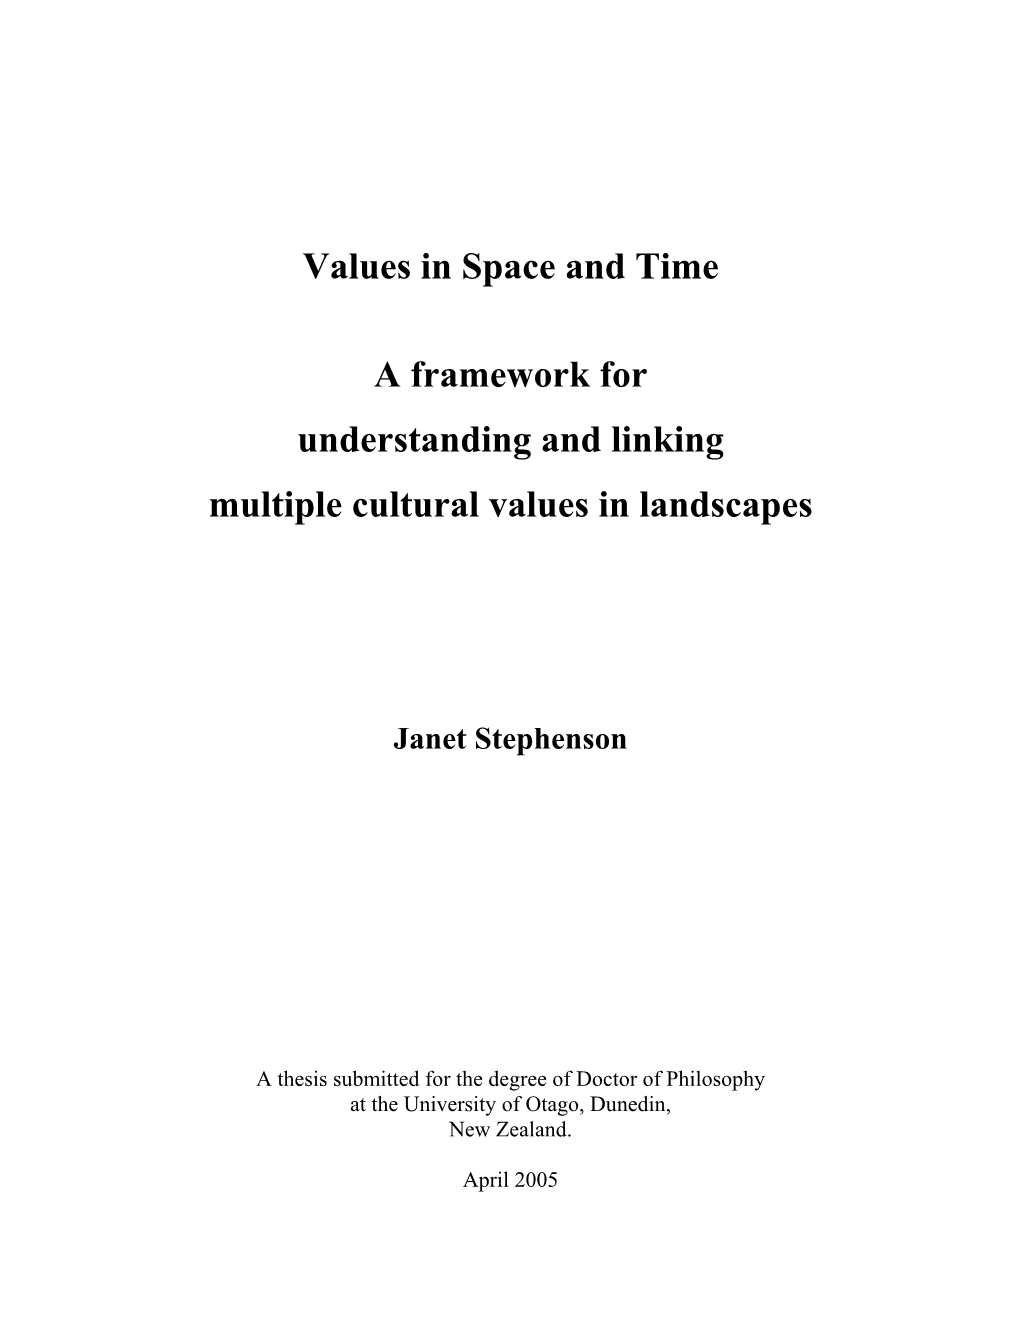 Values in Space and Time a Framework for Understanding And